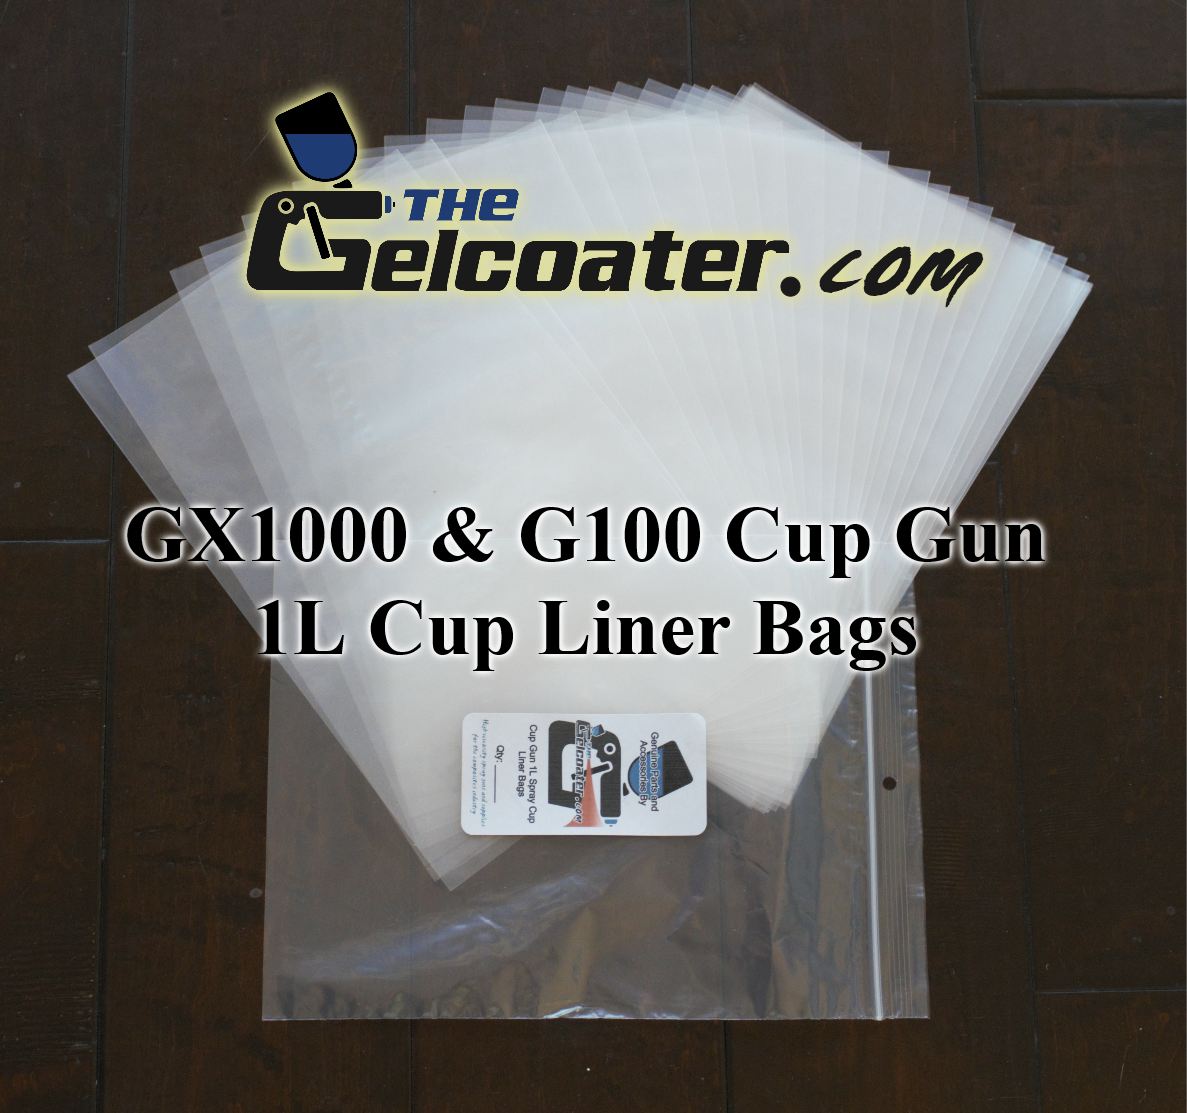 1 liter liner bags spread out